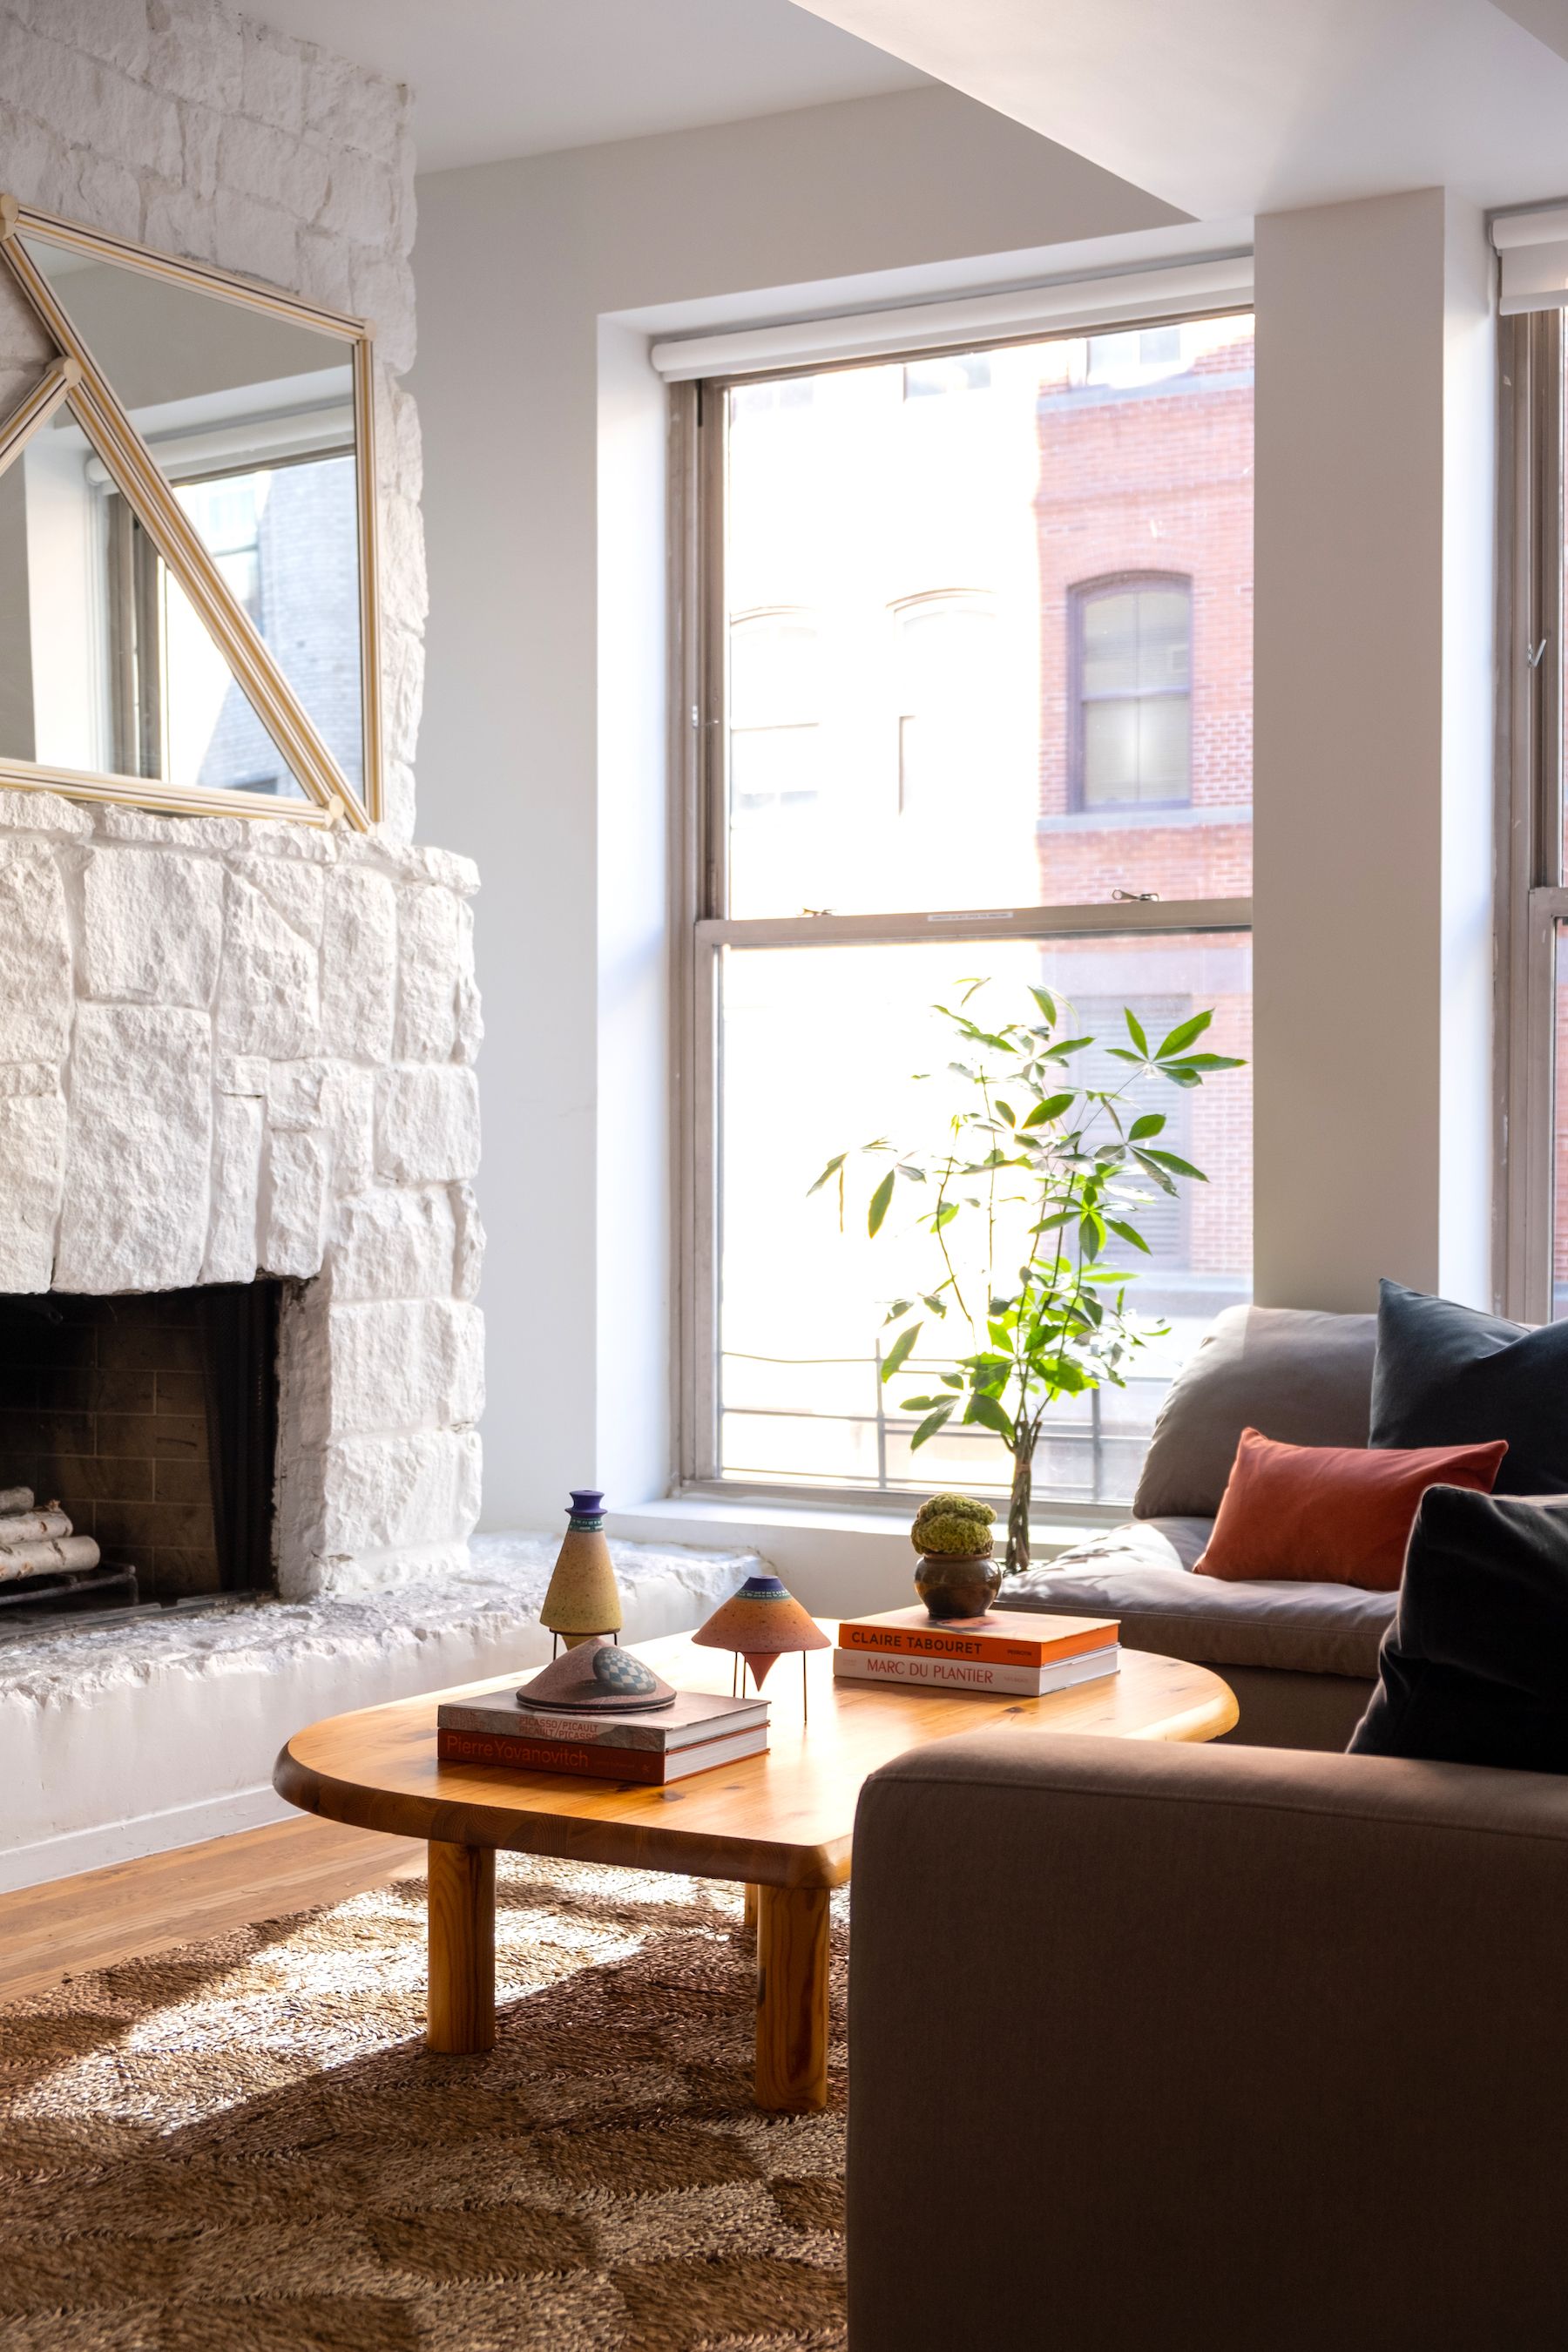 22 Stylish Painted Fireplaces That Look Modern and Cozy